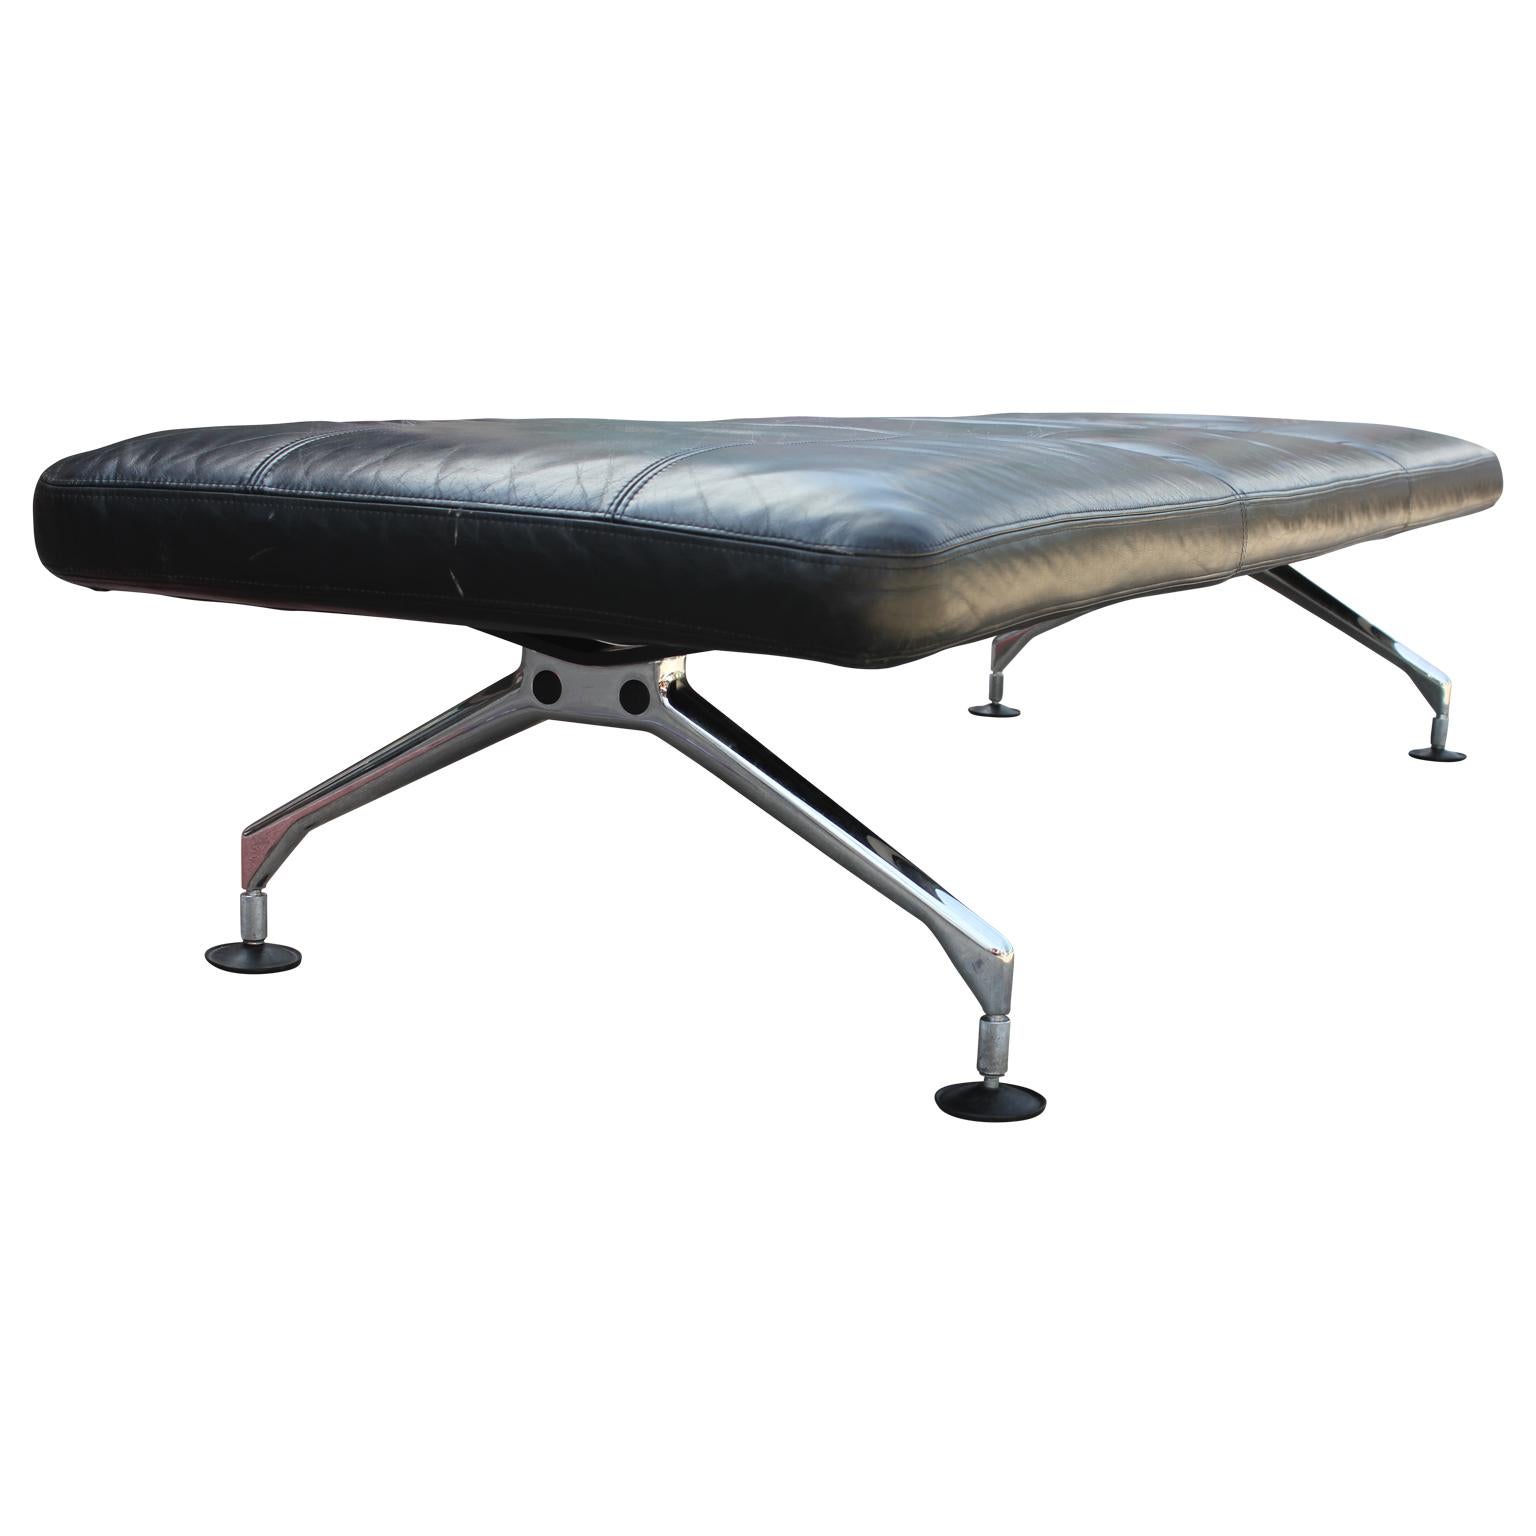 Dutch Modern Area Long Leather Bench by Antonio Citterio for Vitra